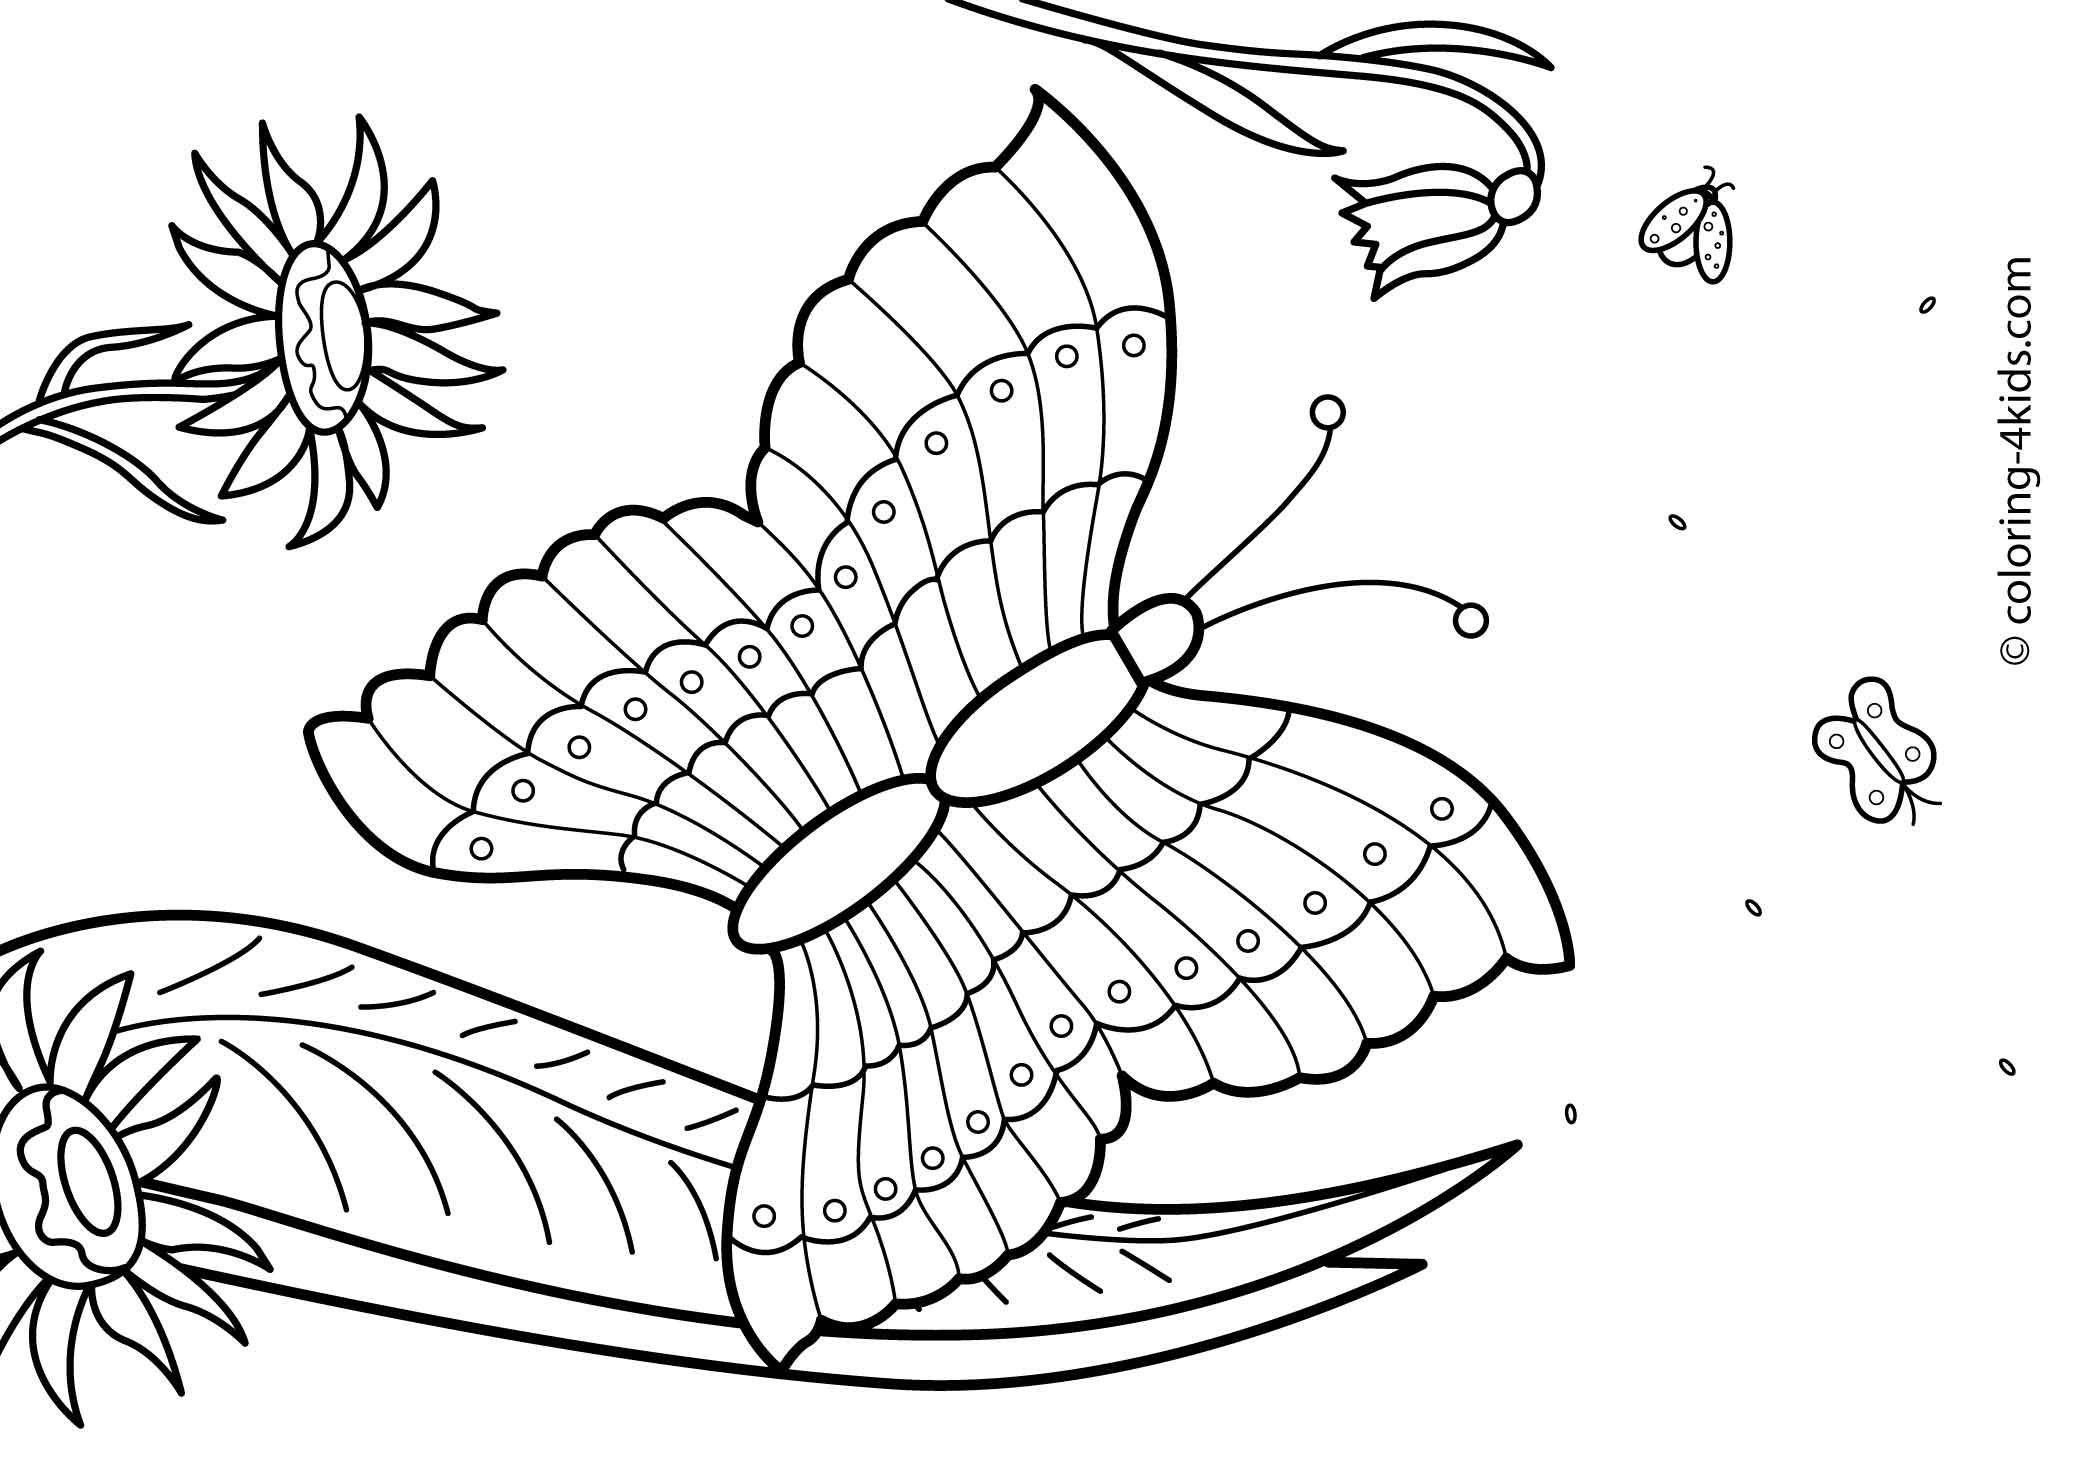 oggy and olivia coloring pages - photo #12